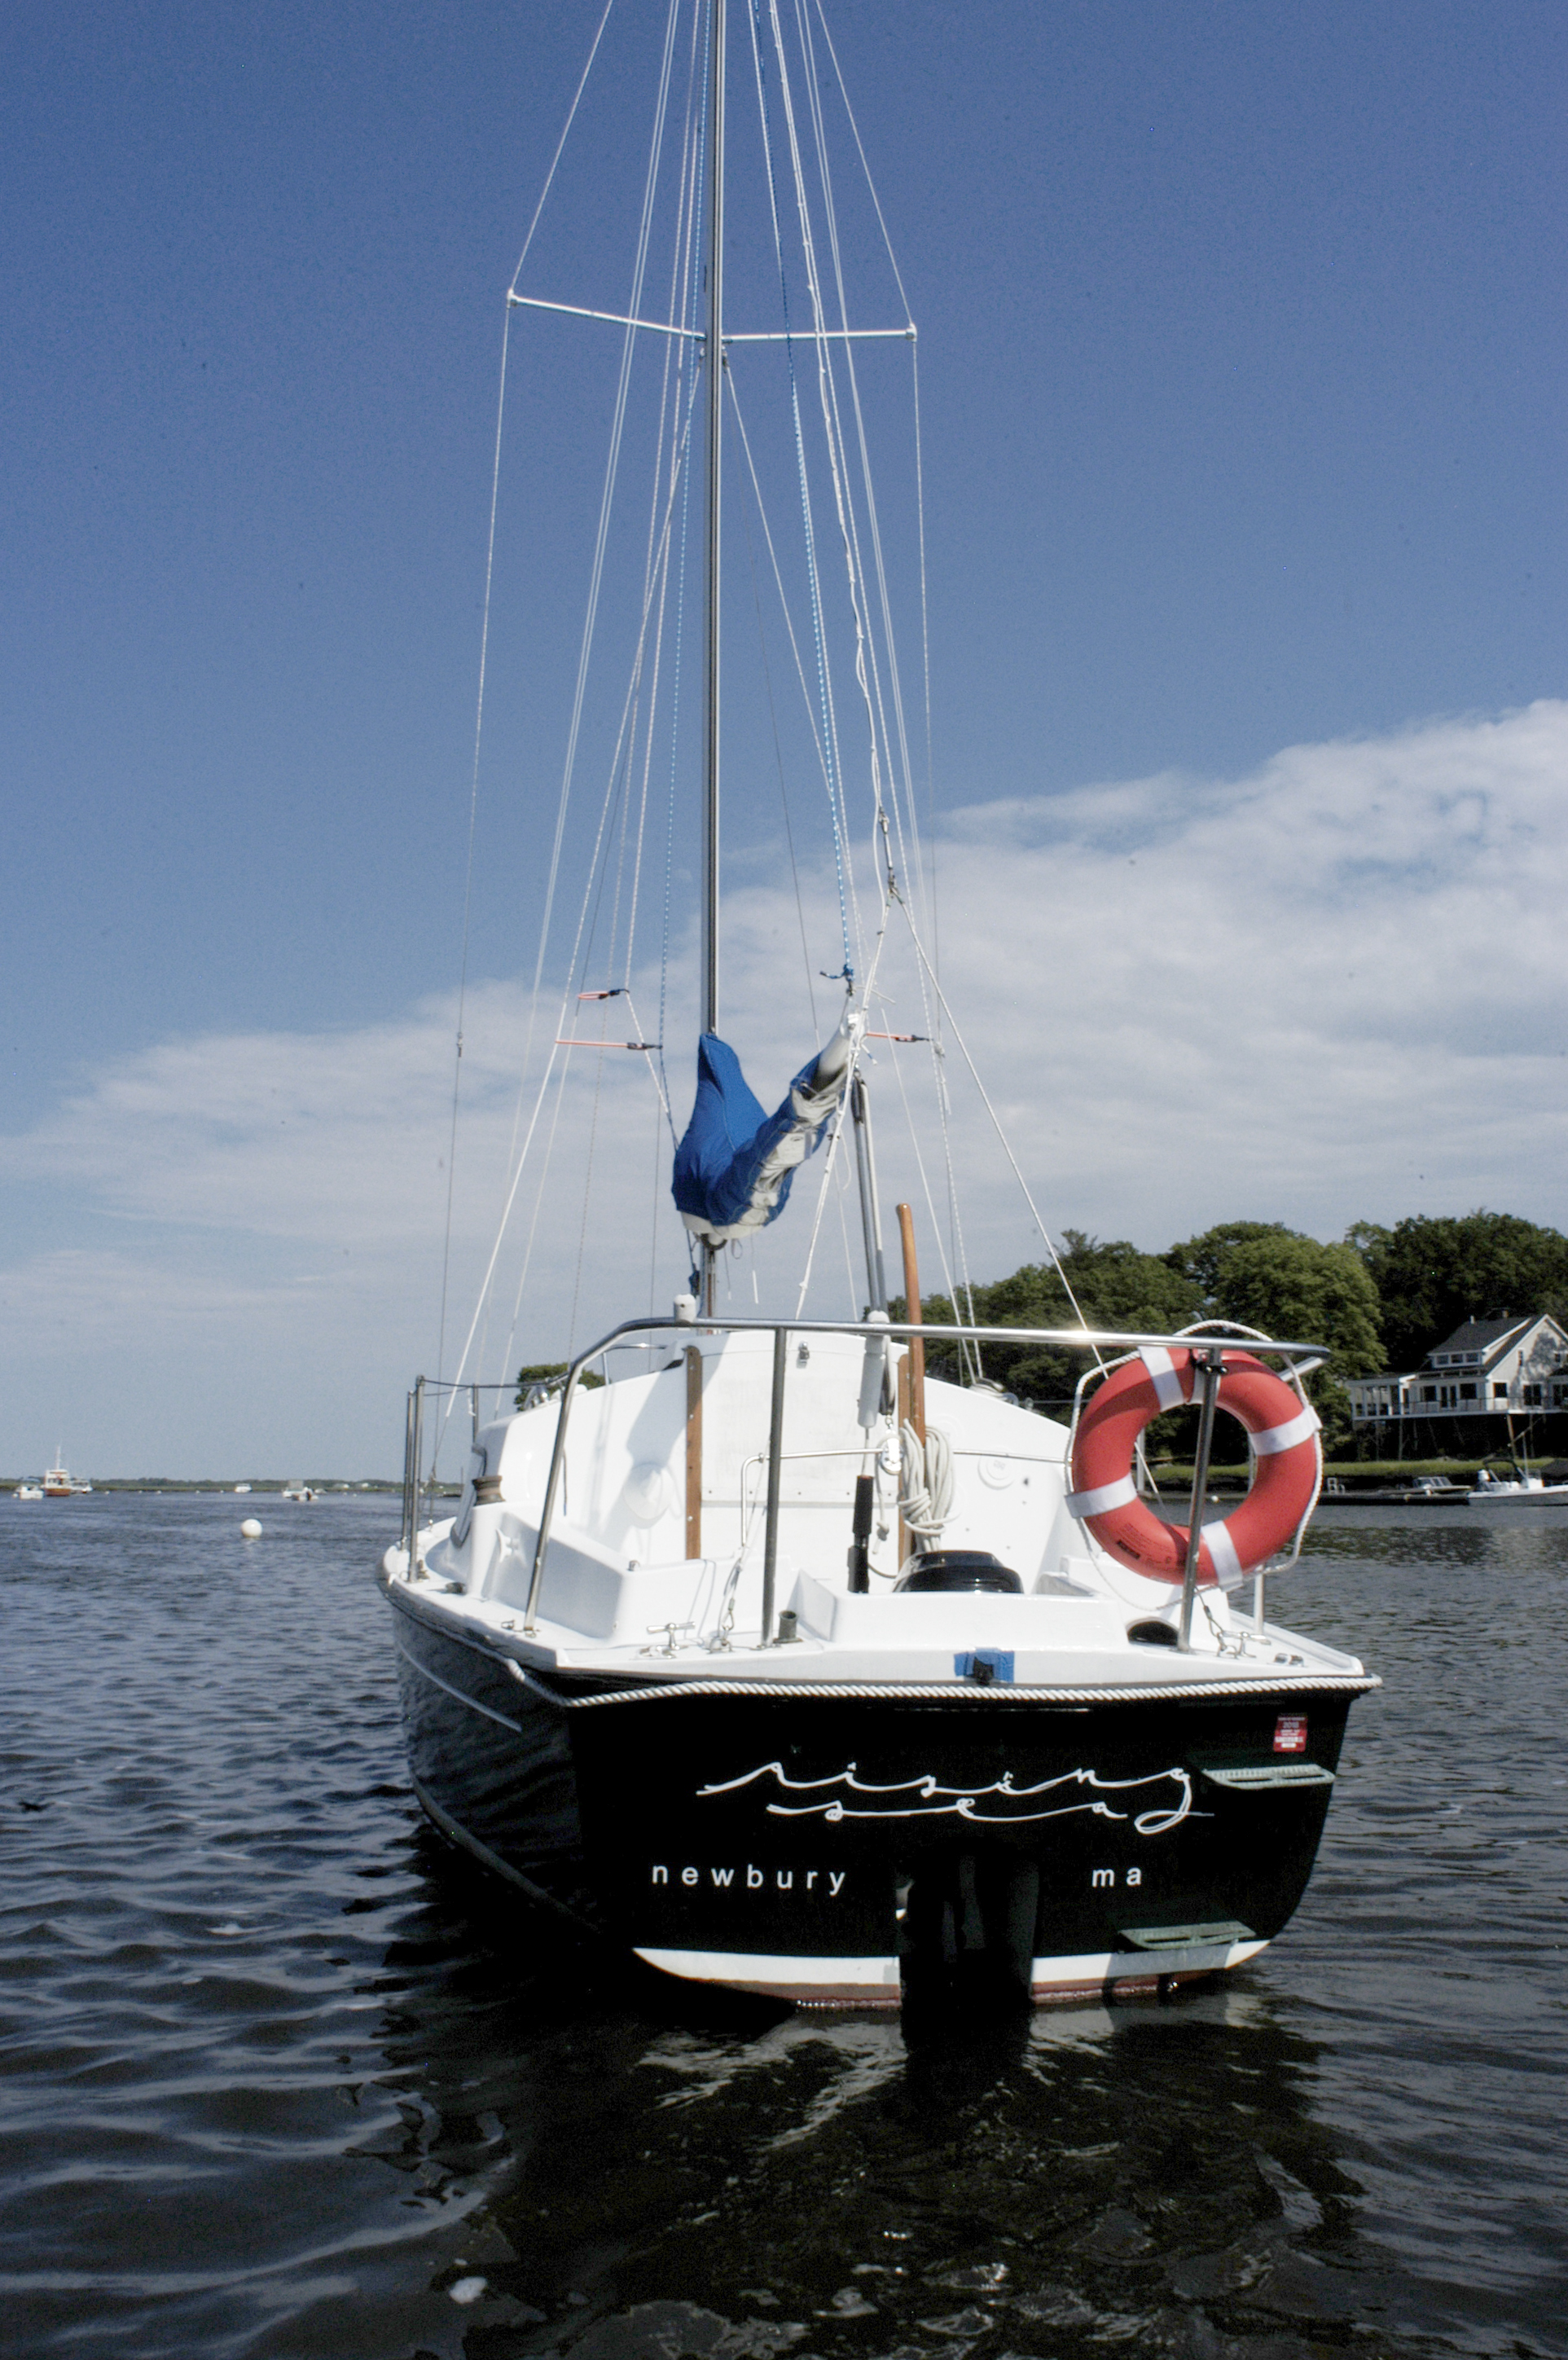 Rising sea stern with vinyl decal